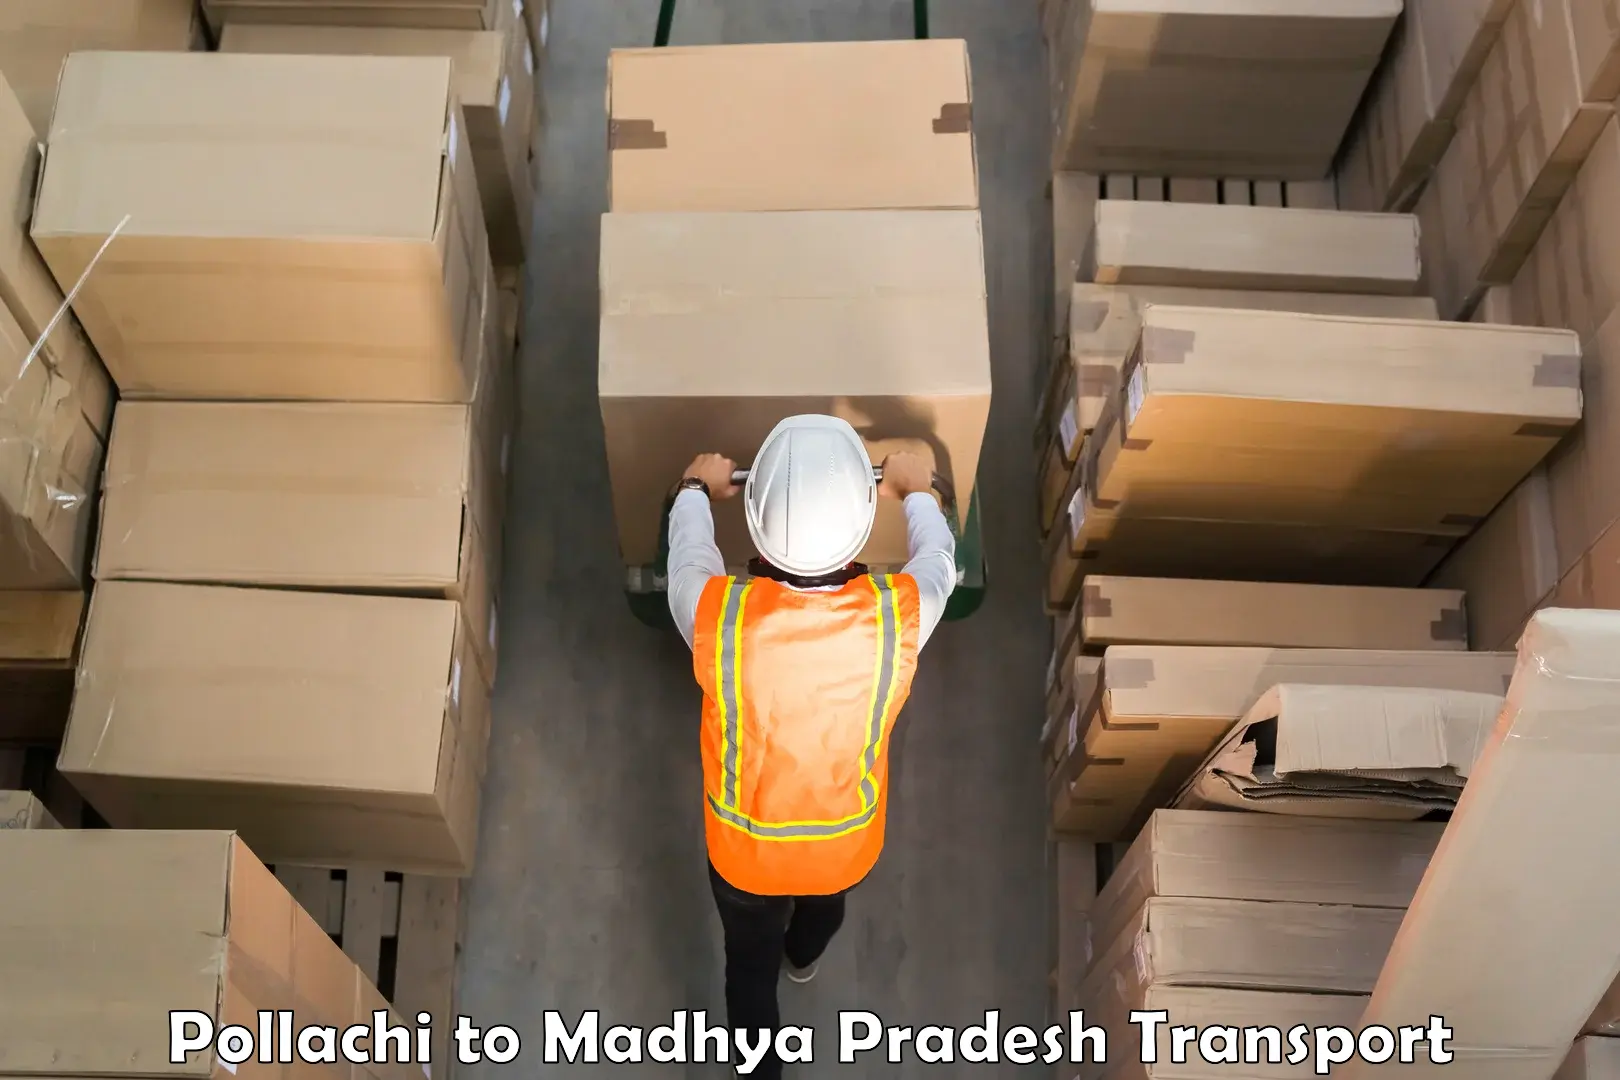 Goods delivery service Pollachi to Madhya Pradesh